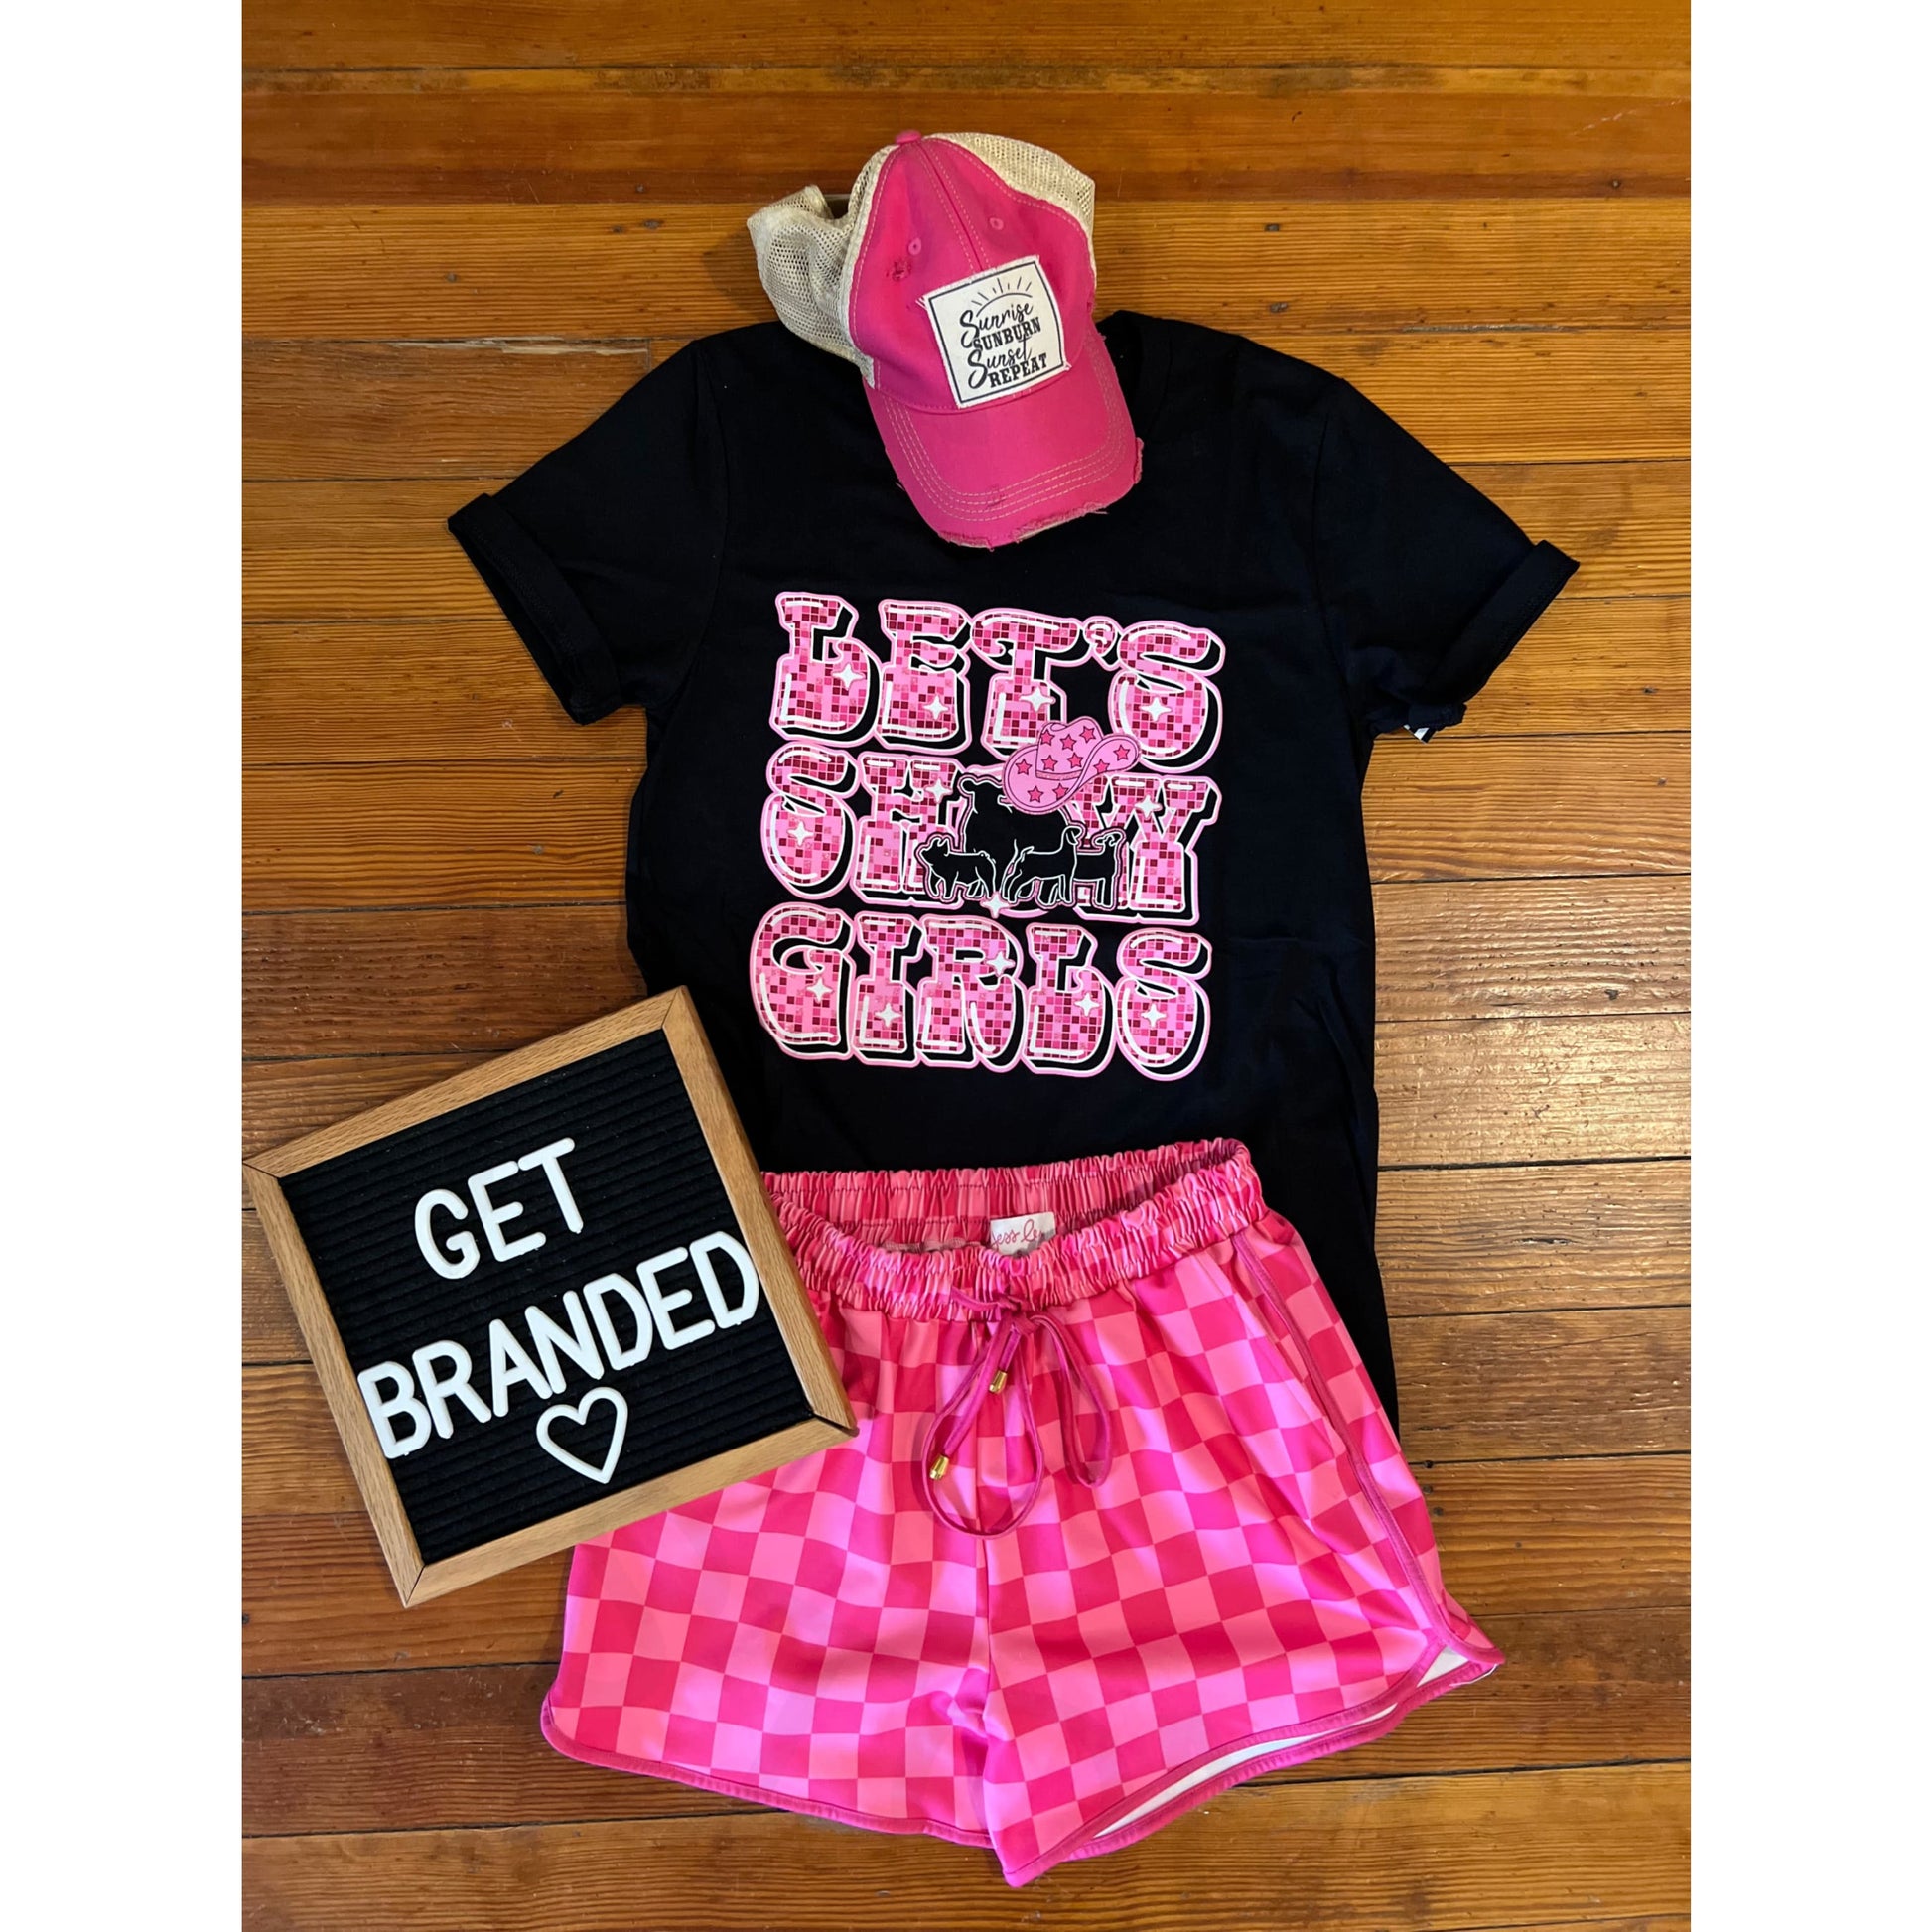 Let’s Show Girls - Stock Show Tee - Apparel & Accessories